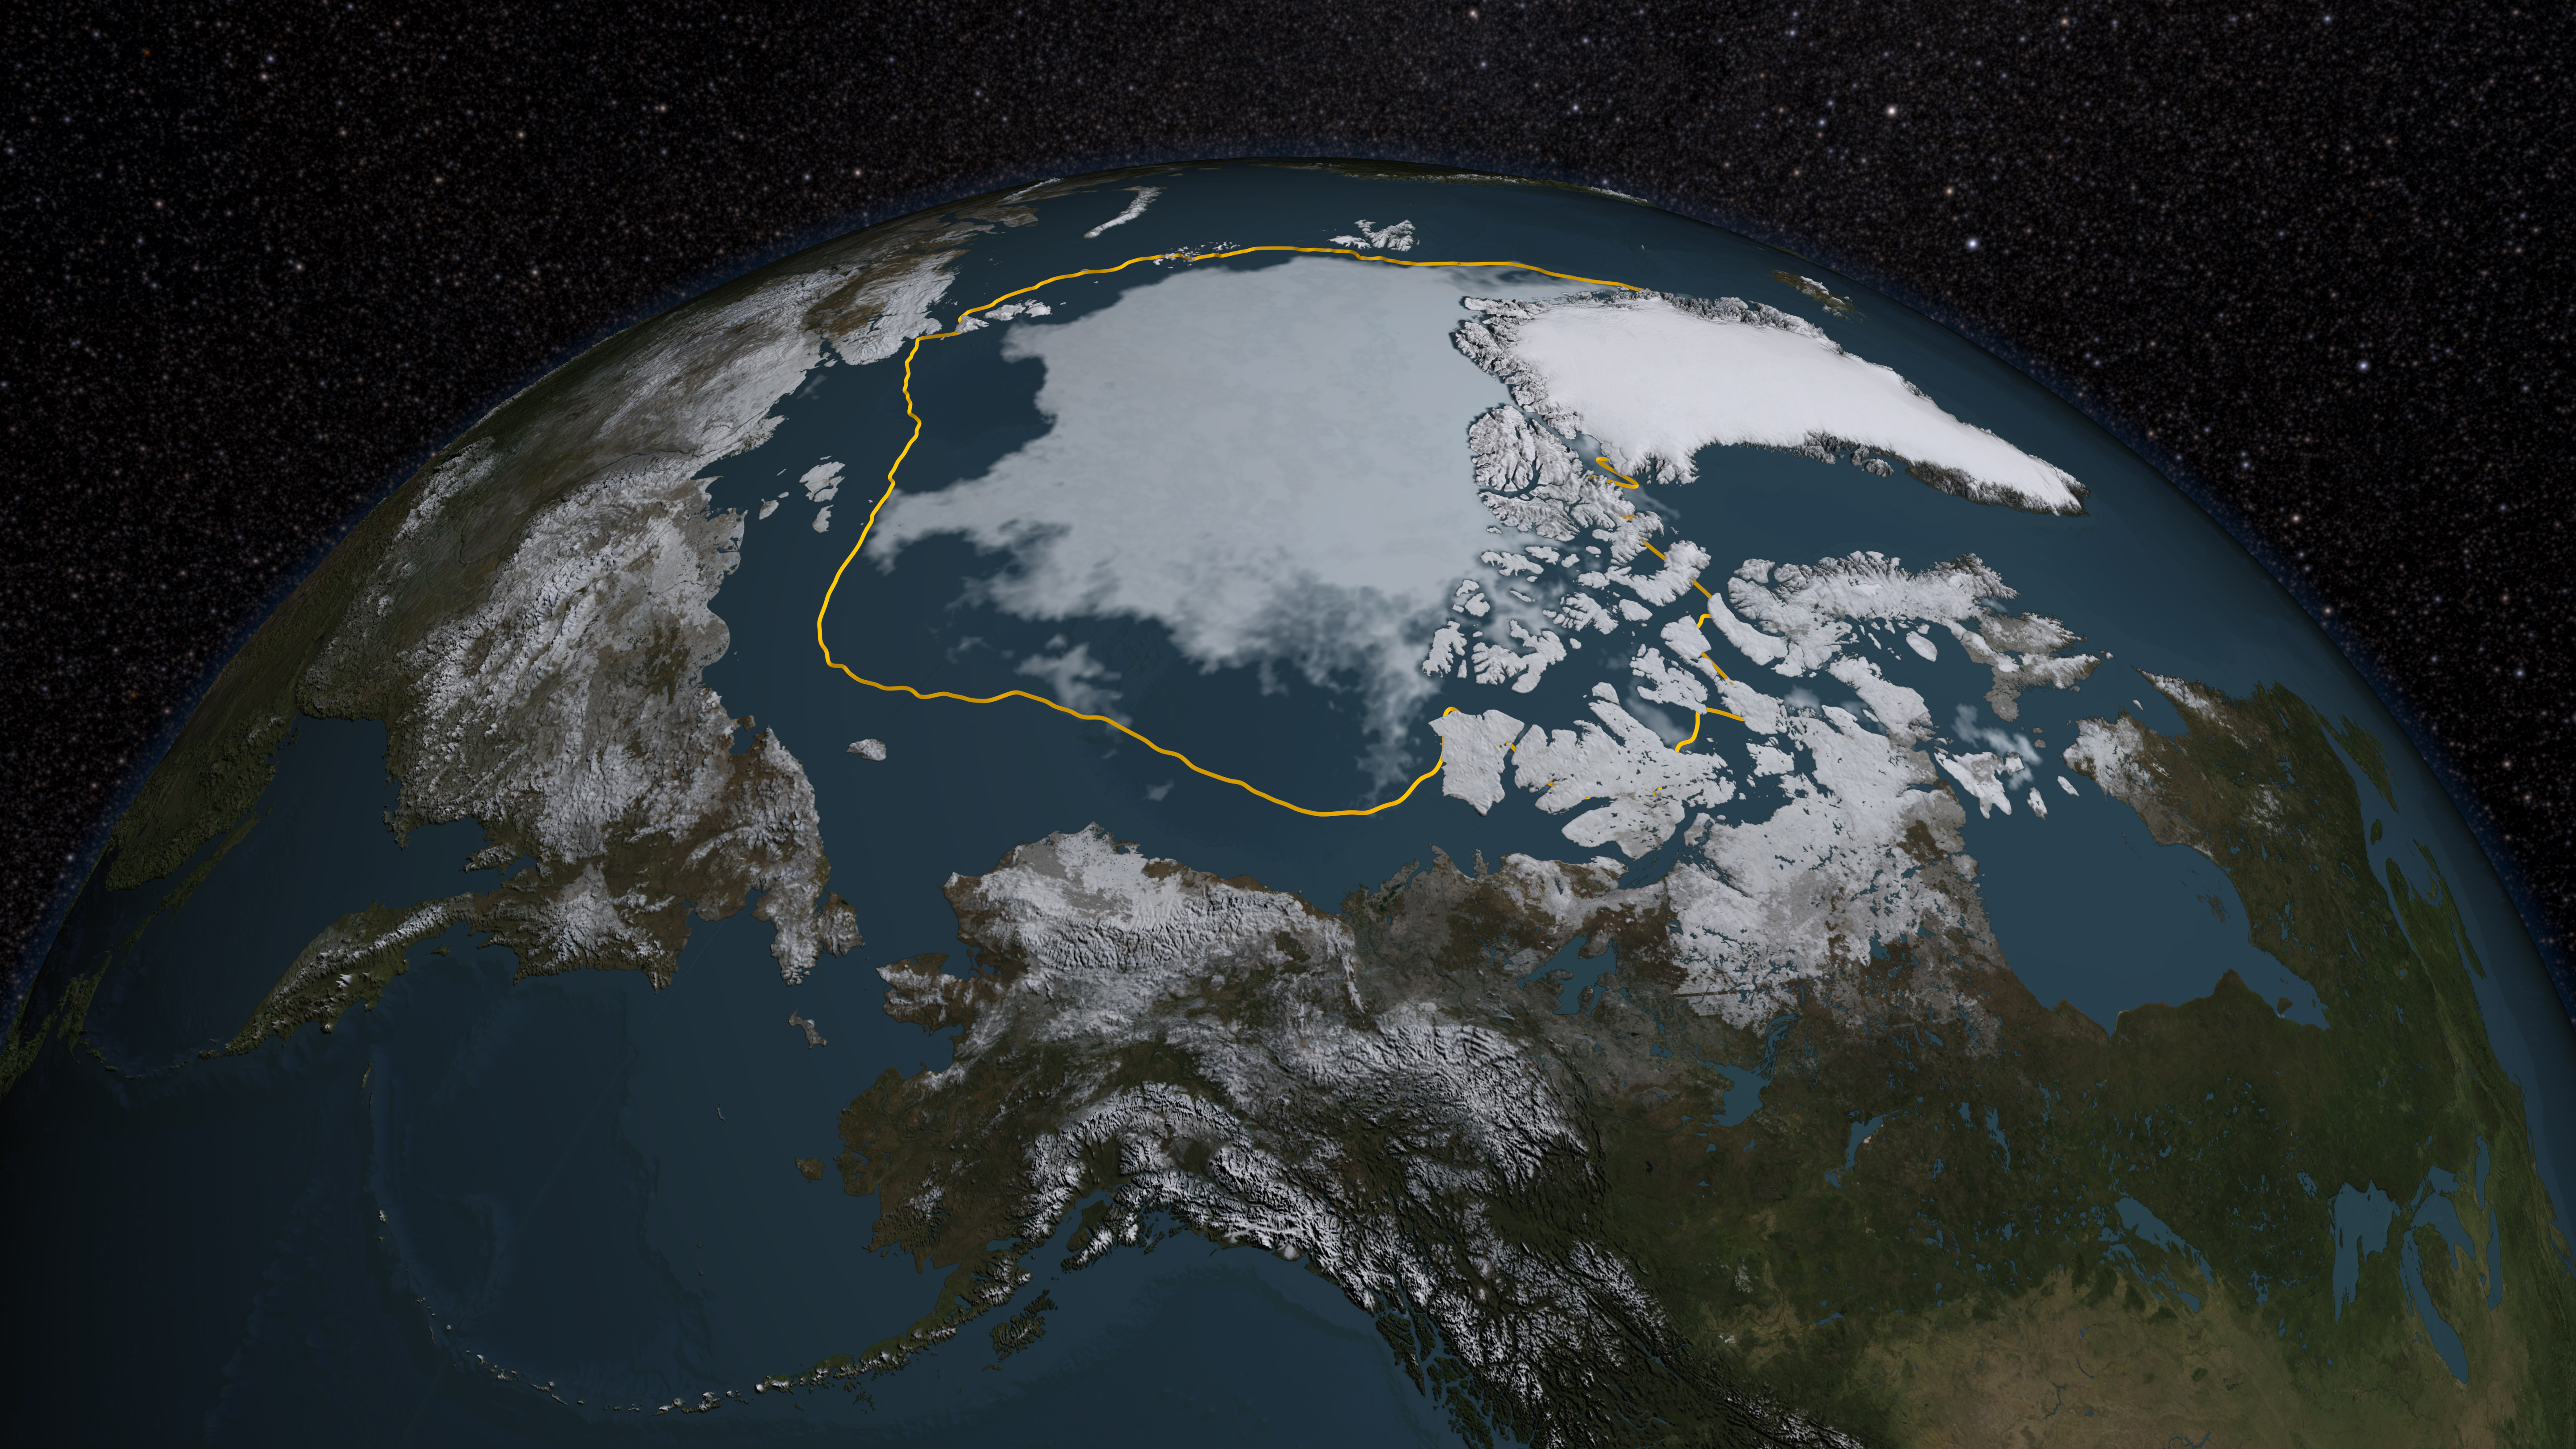 The  2015 Arctic sea ice summertime minimum is 699,000 square miles below the 1981-2010 average, shown here as a gold line. Image courtesy of NASA/Goddard Scientific Visualization.